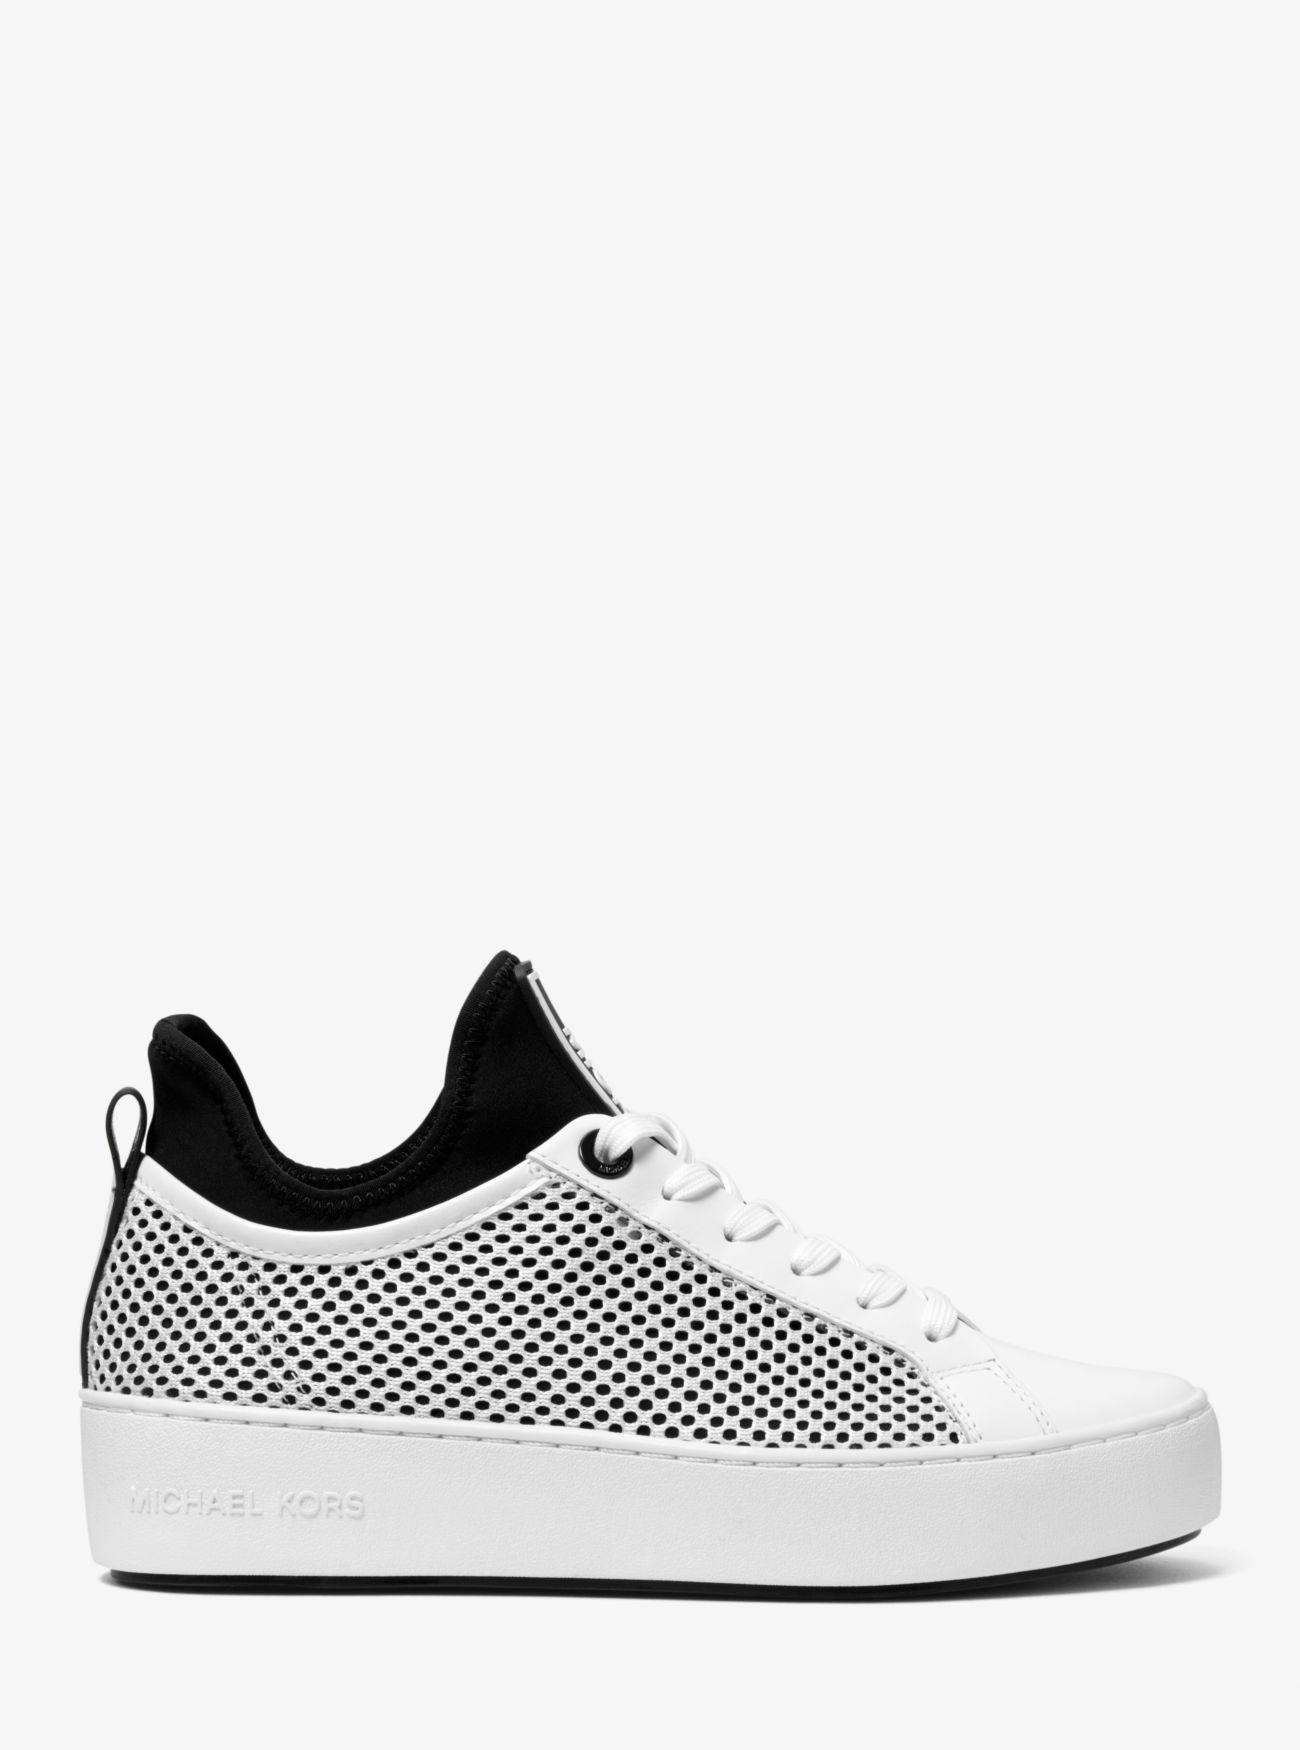 ace perforated leather and scuba sneaker